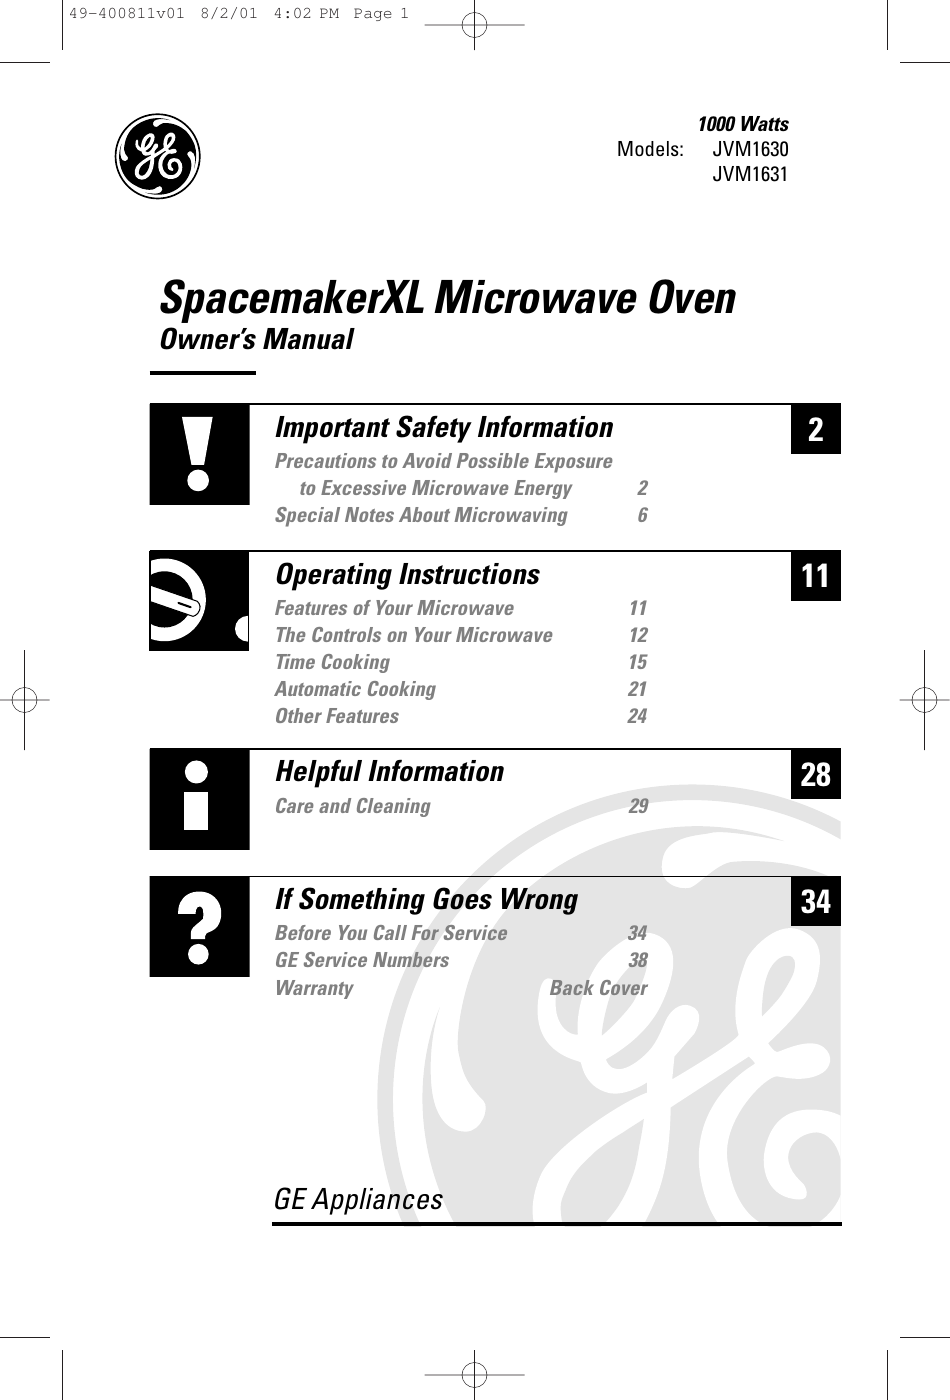 GE AppliancesSpacemakerXL Microwave OvenOwner’s ManualModels: 1000 WattsJVM1630JVM1631228Helpful InformationCare and Cleaning 2934If Something Goes WrongBefore You Call For Service 34GE Service Numbers 38Warranty Back Cover11Important Safety InformationPrecautions to Avoid Possible Exposure to Excessive Microwave Energy 2Special Notes About Microwaving 6Operating InstructionsFeatures of Your Microwave 11The Controls on Your Microwave 12Time Cooking 15Automatic Cooking 21Other Features 2449-400811v01  8/2/01  4:02 PM  Page 1